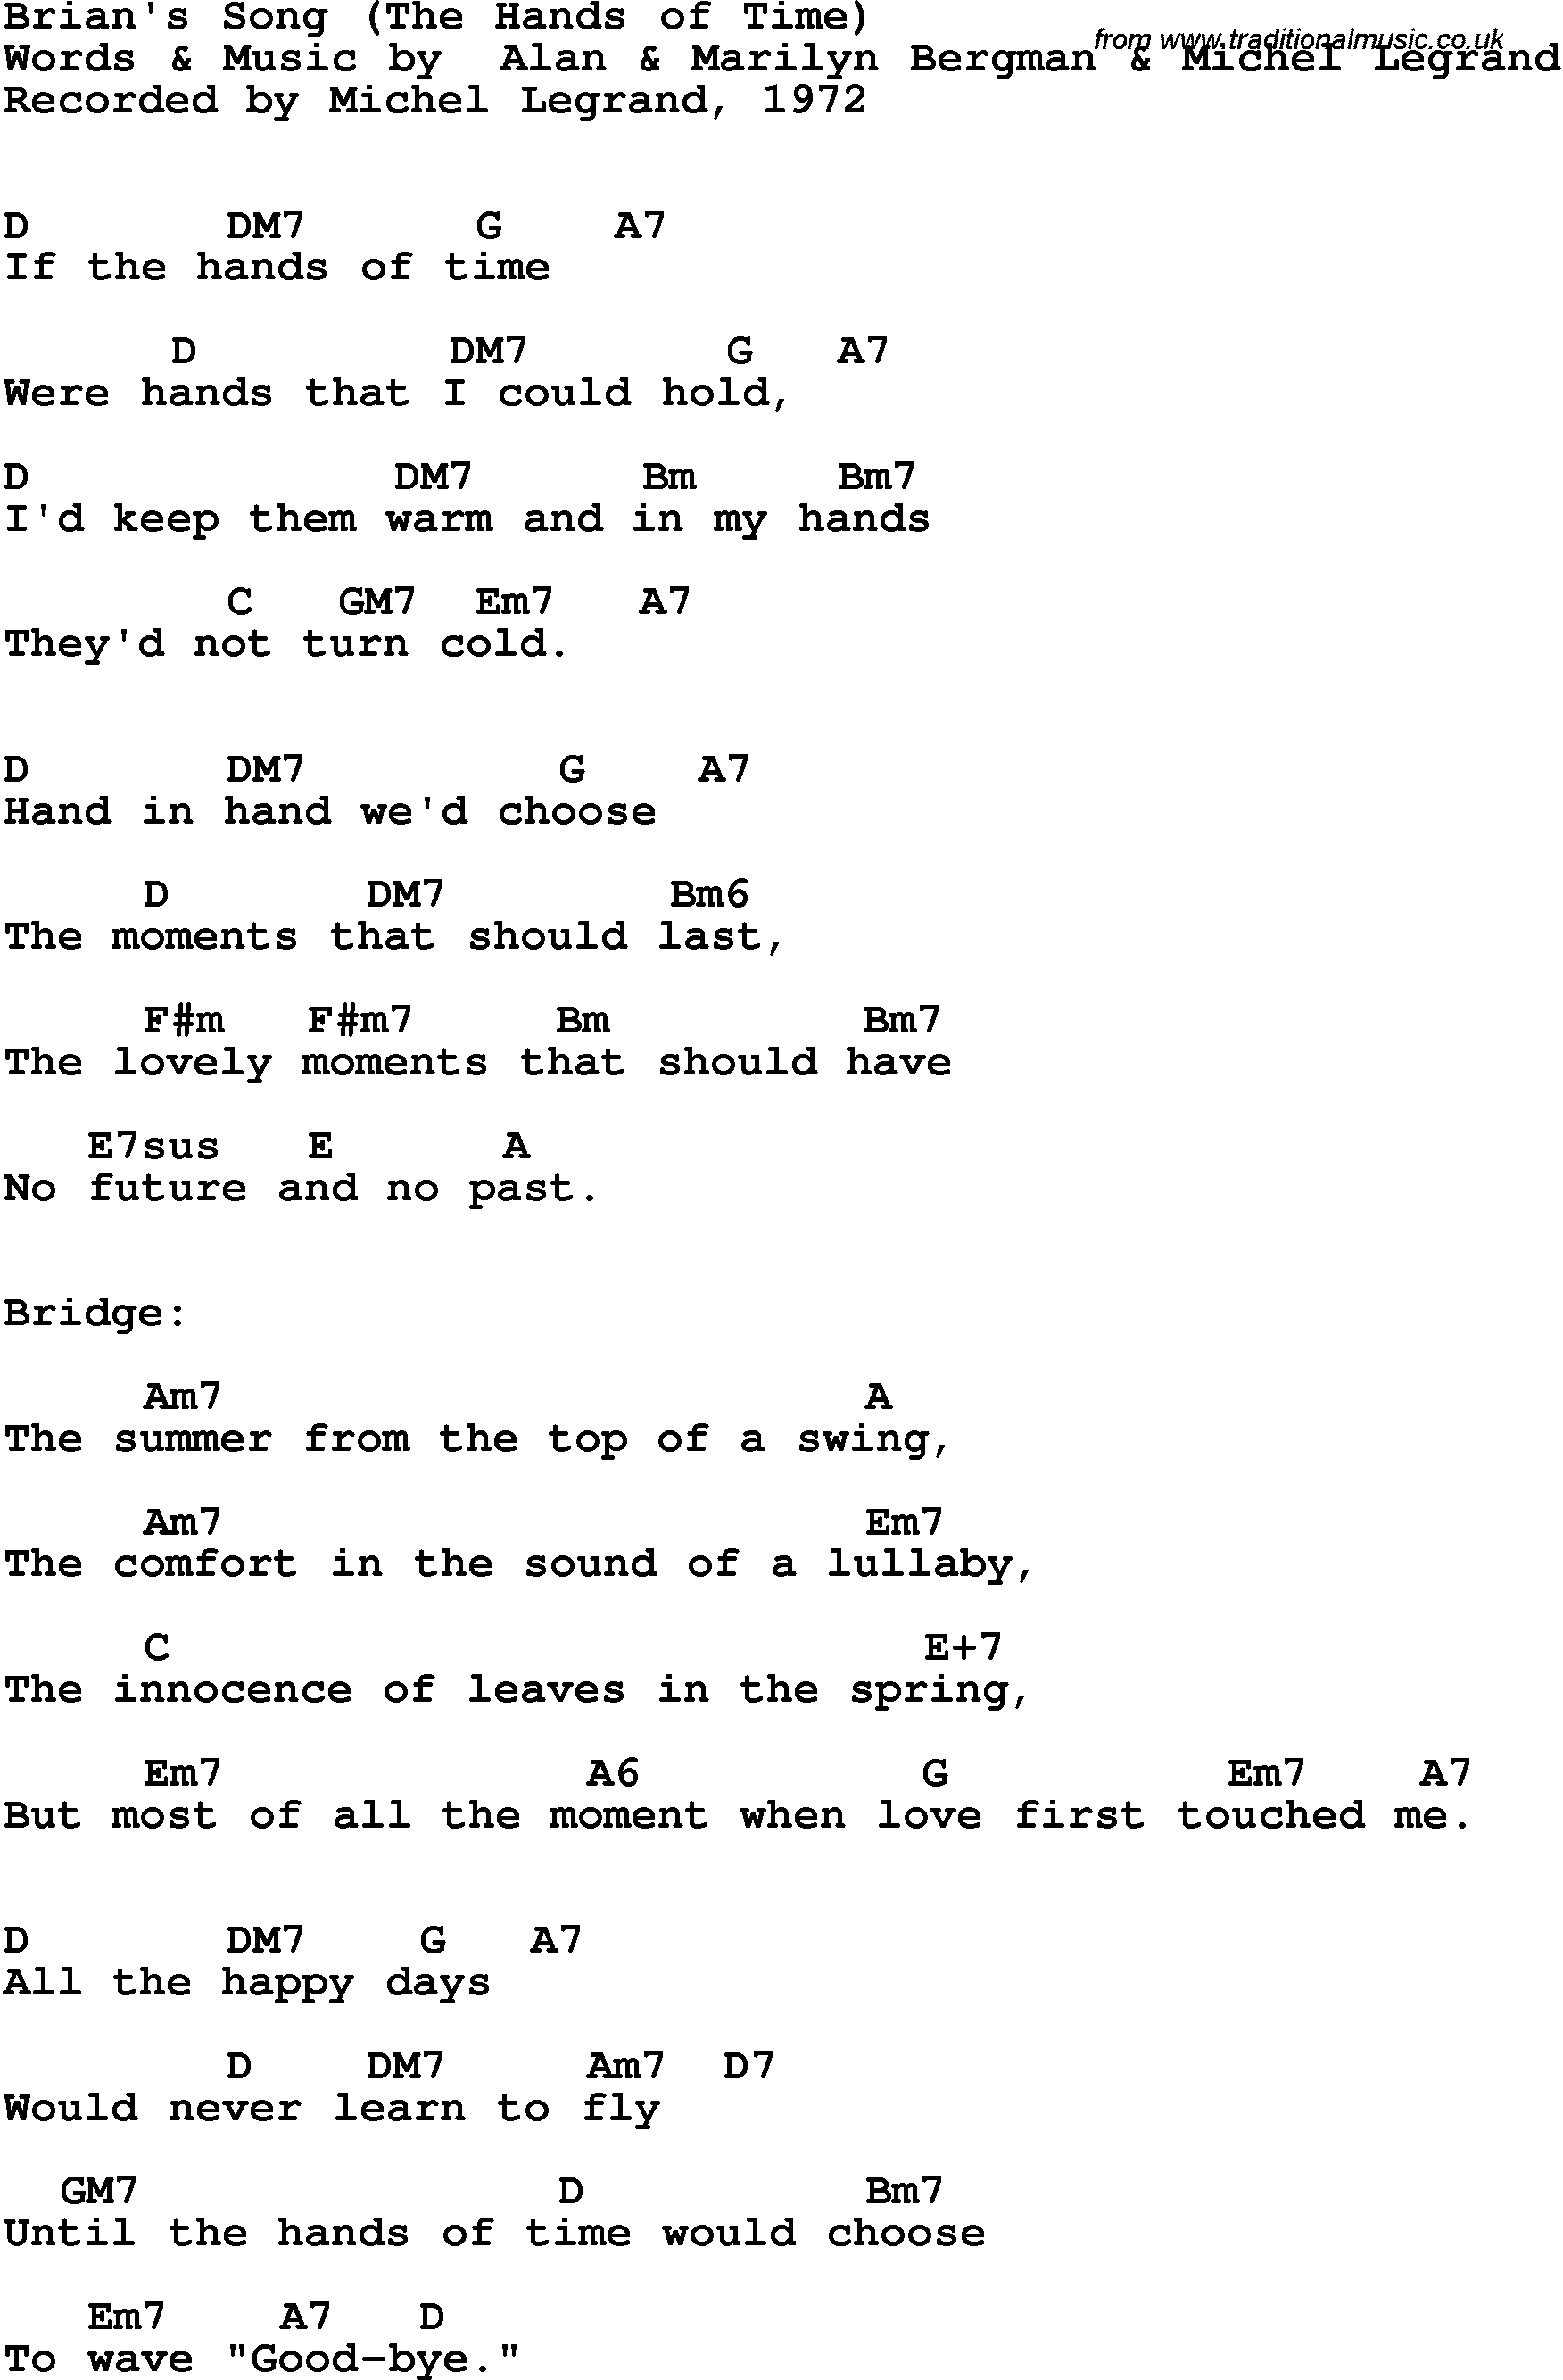 Song Lyrics with guitar chords for Brian's Song - Michel Legrand, 1972